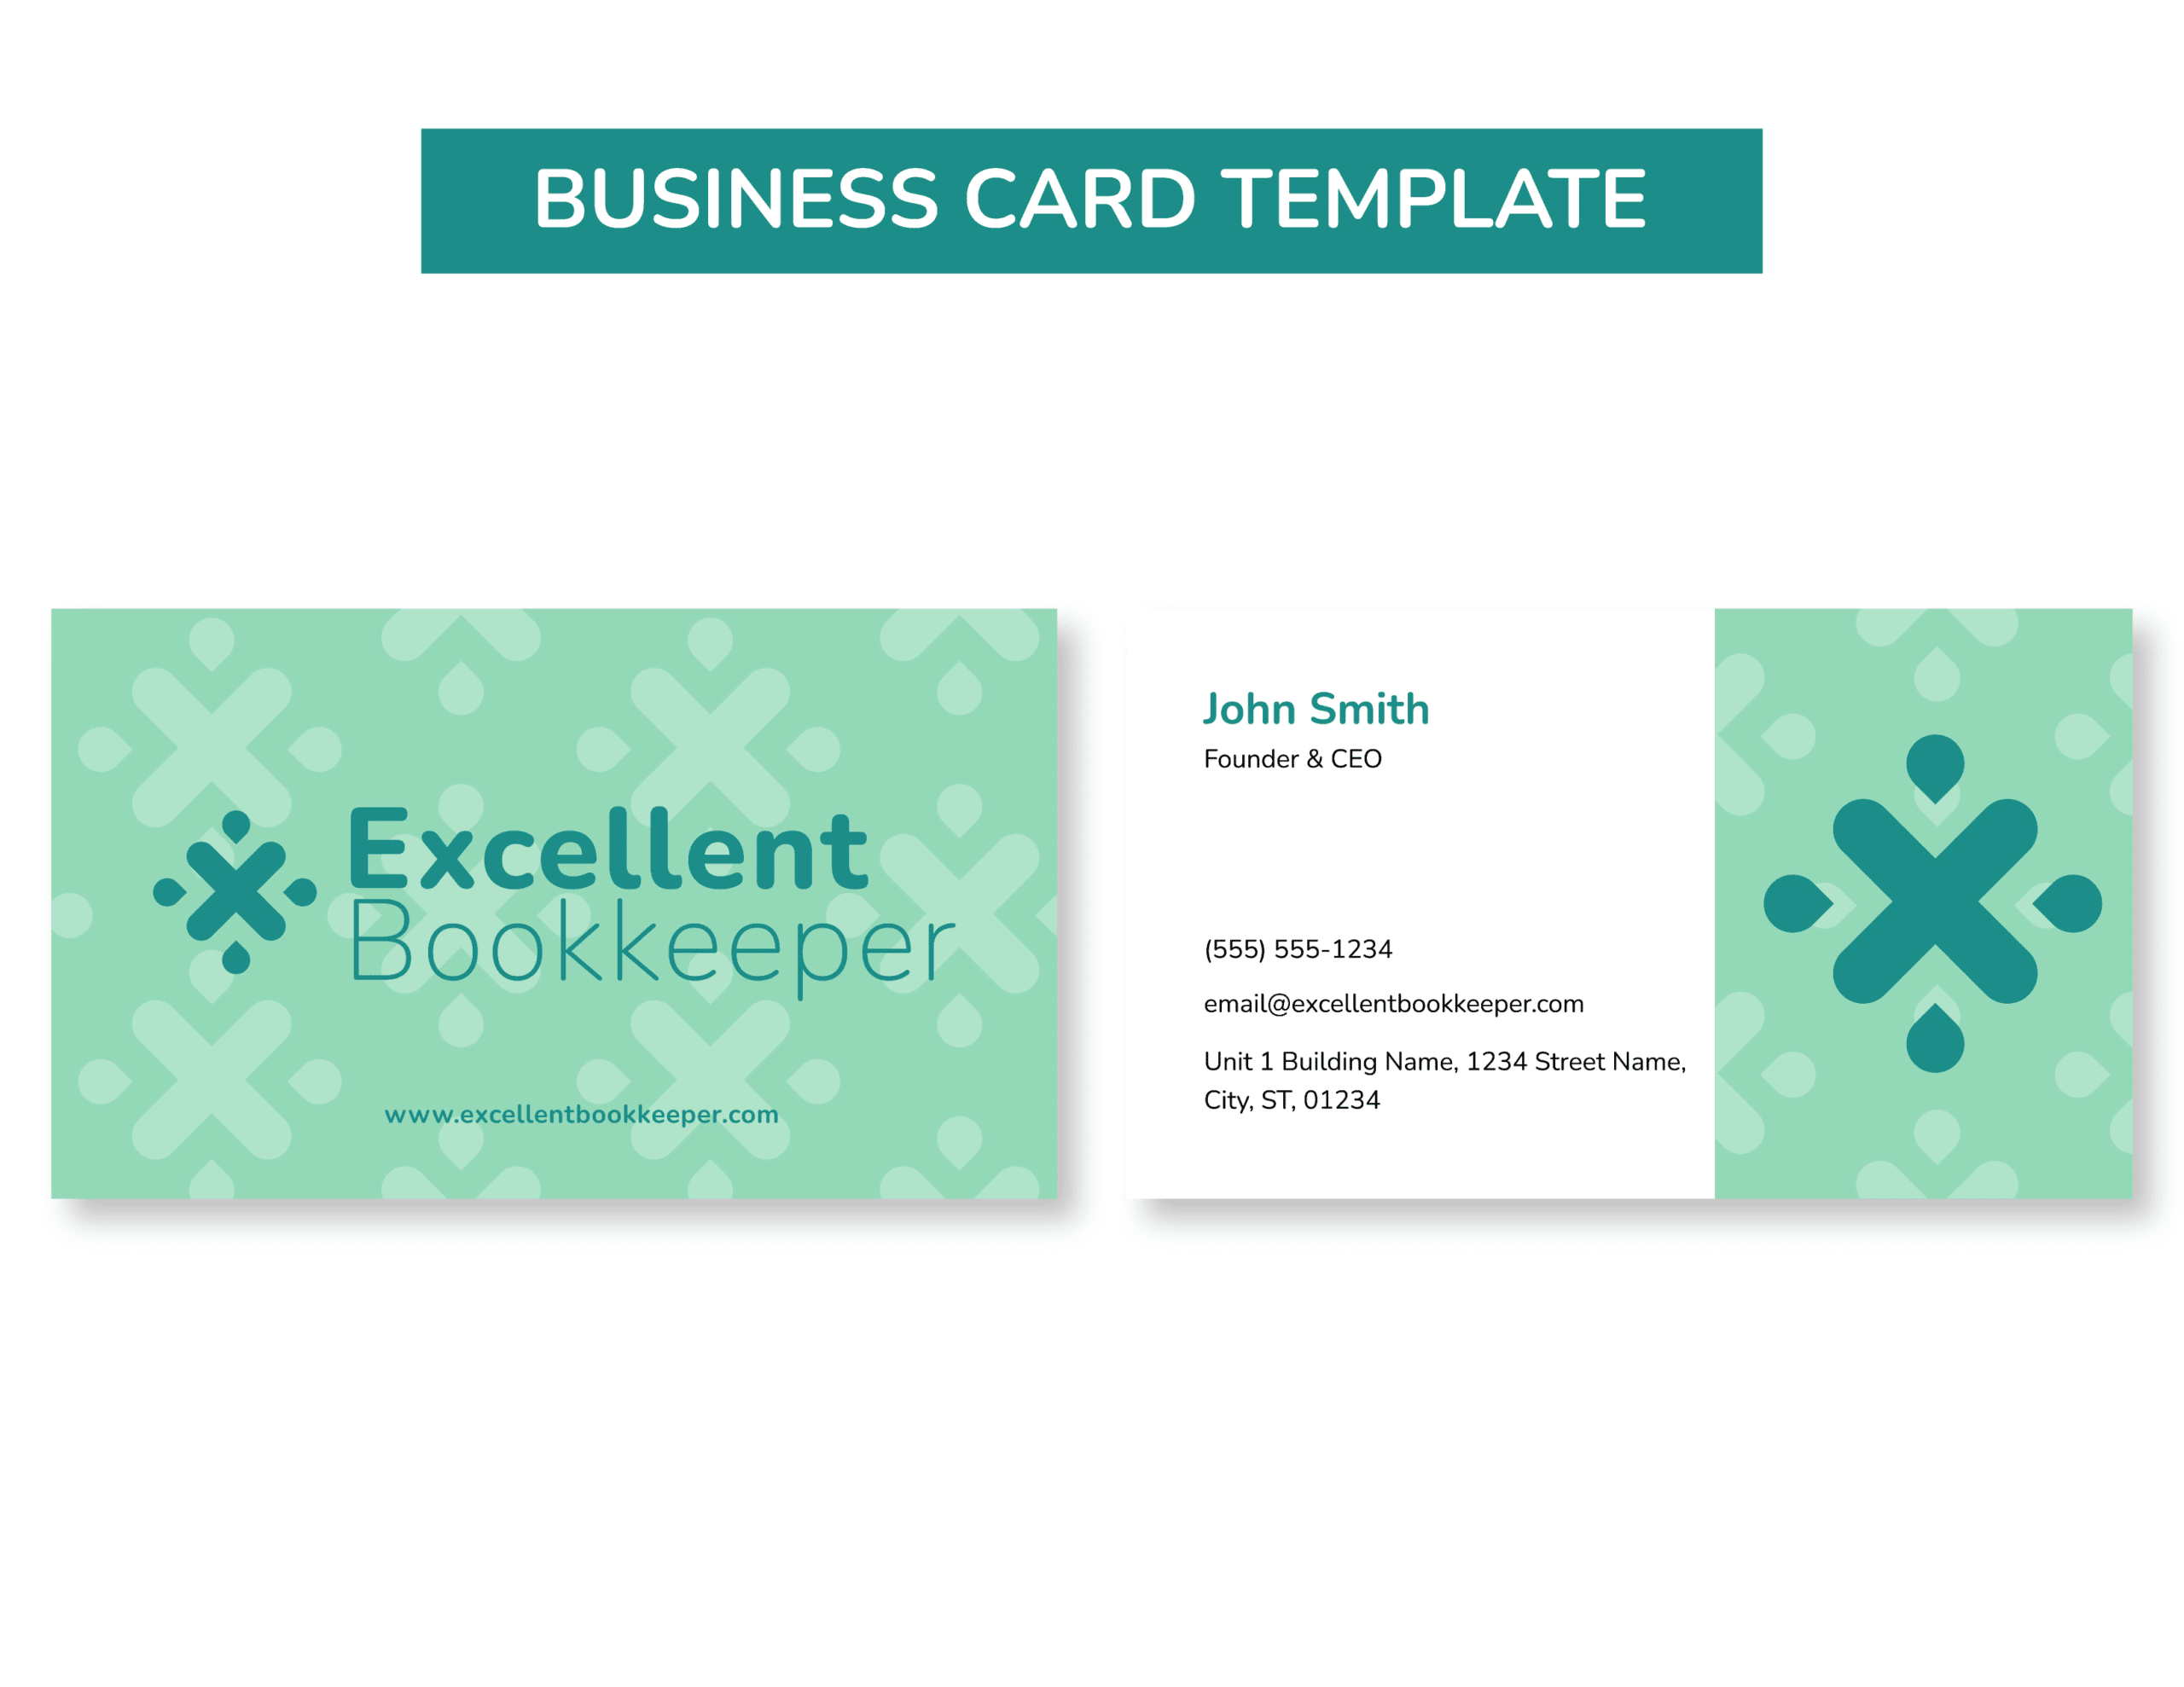 04Excellent__Business Card Template